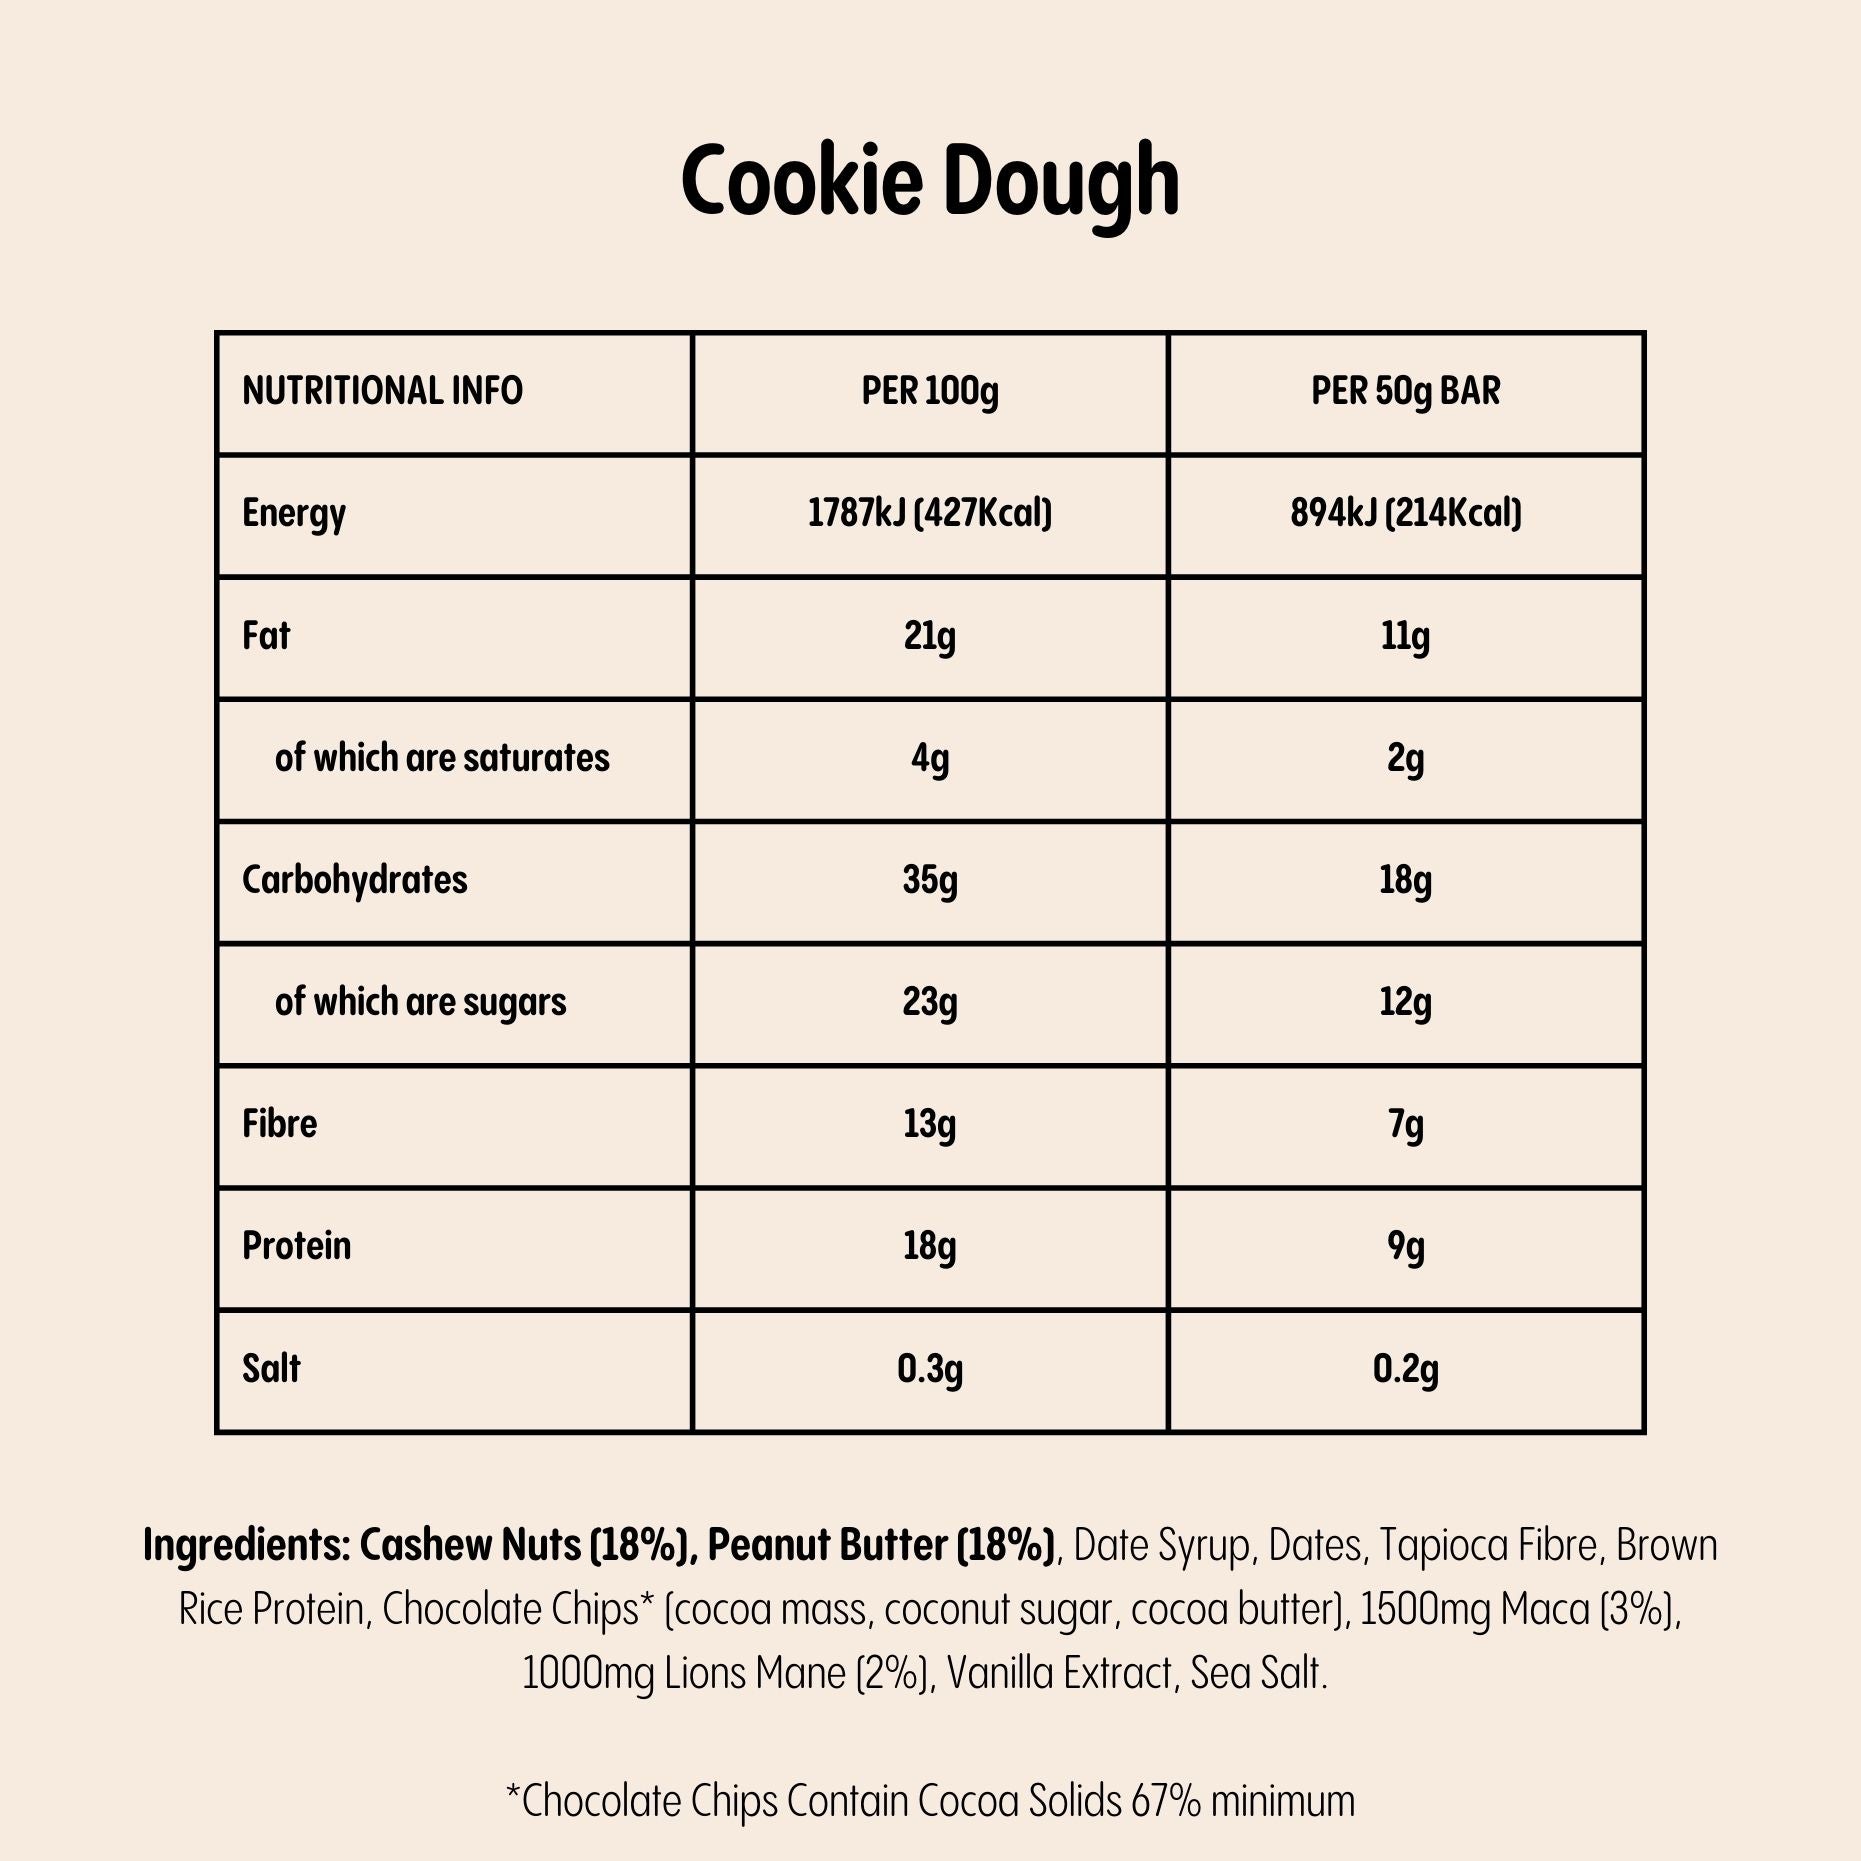 Lucid Cookie Dough bar: nutritional content and key ingredients including Cashew Nuts, Peanut Butter, Lions Mane, Maca.